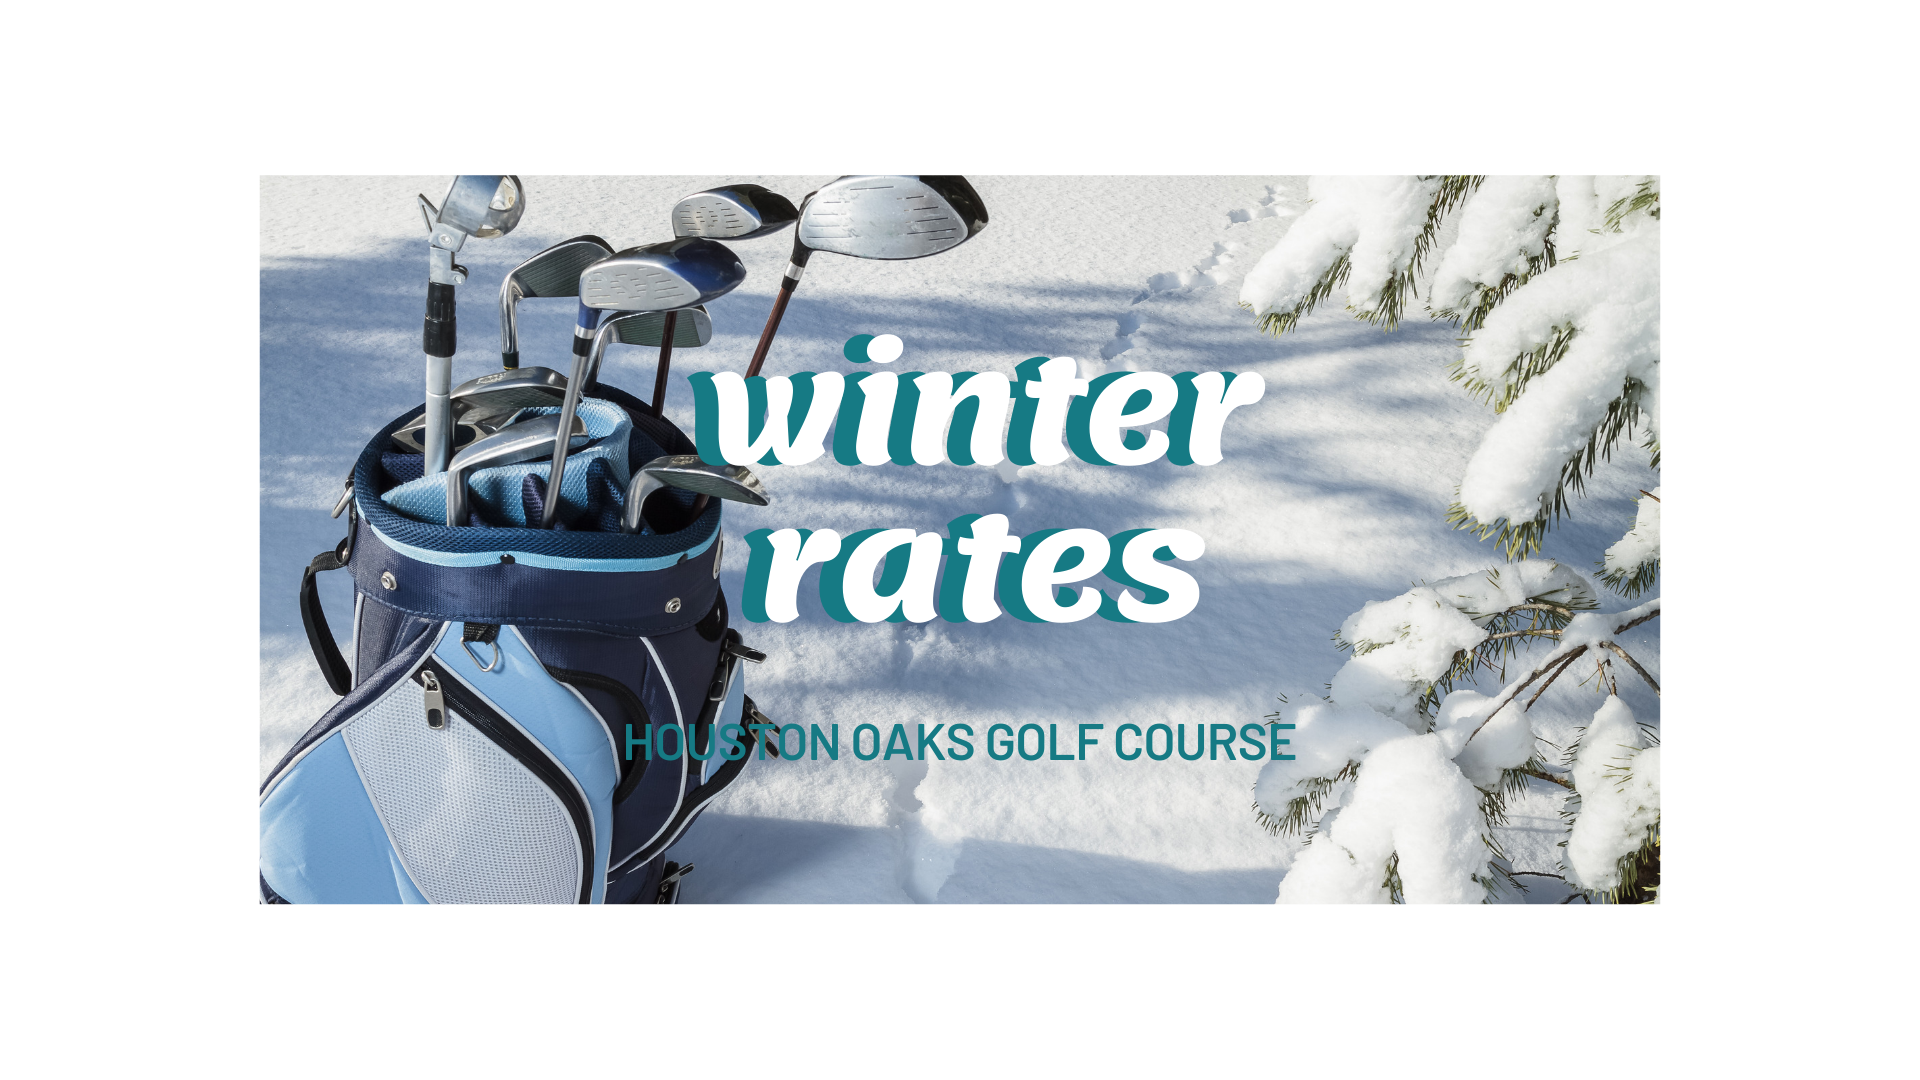 Winter rates came early!